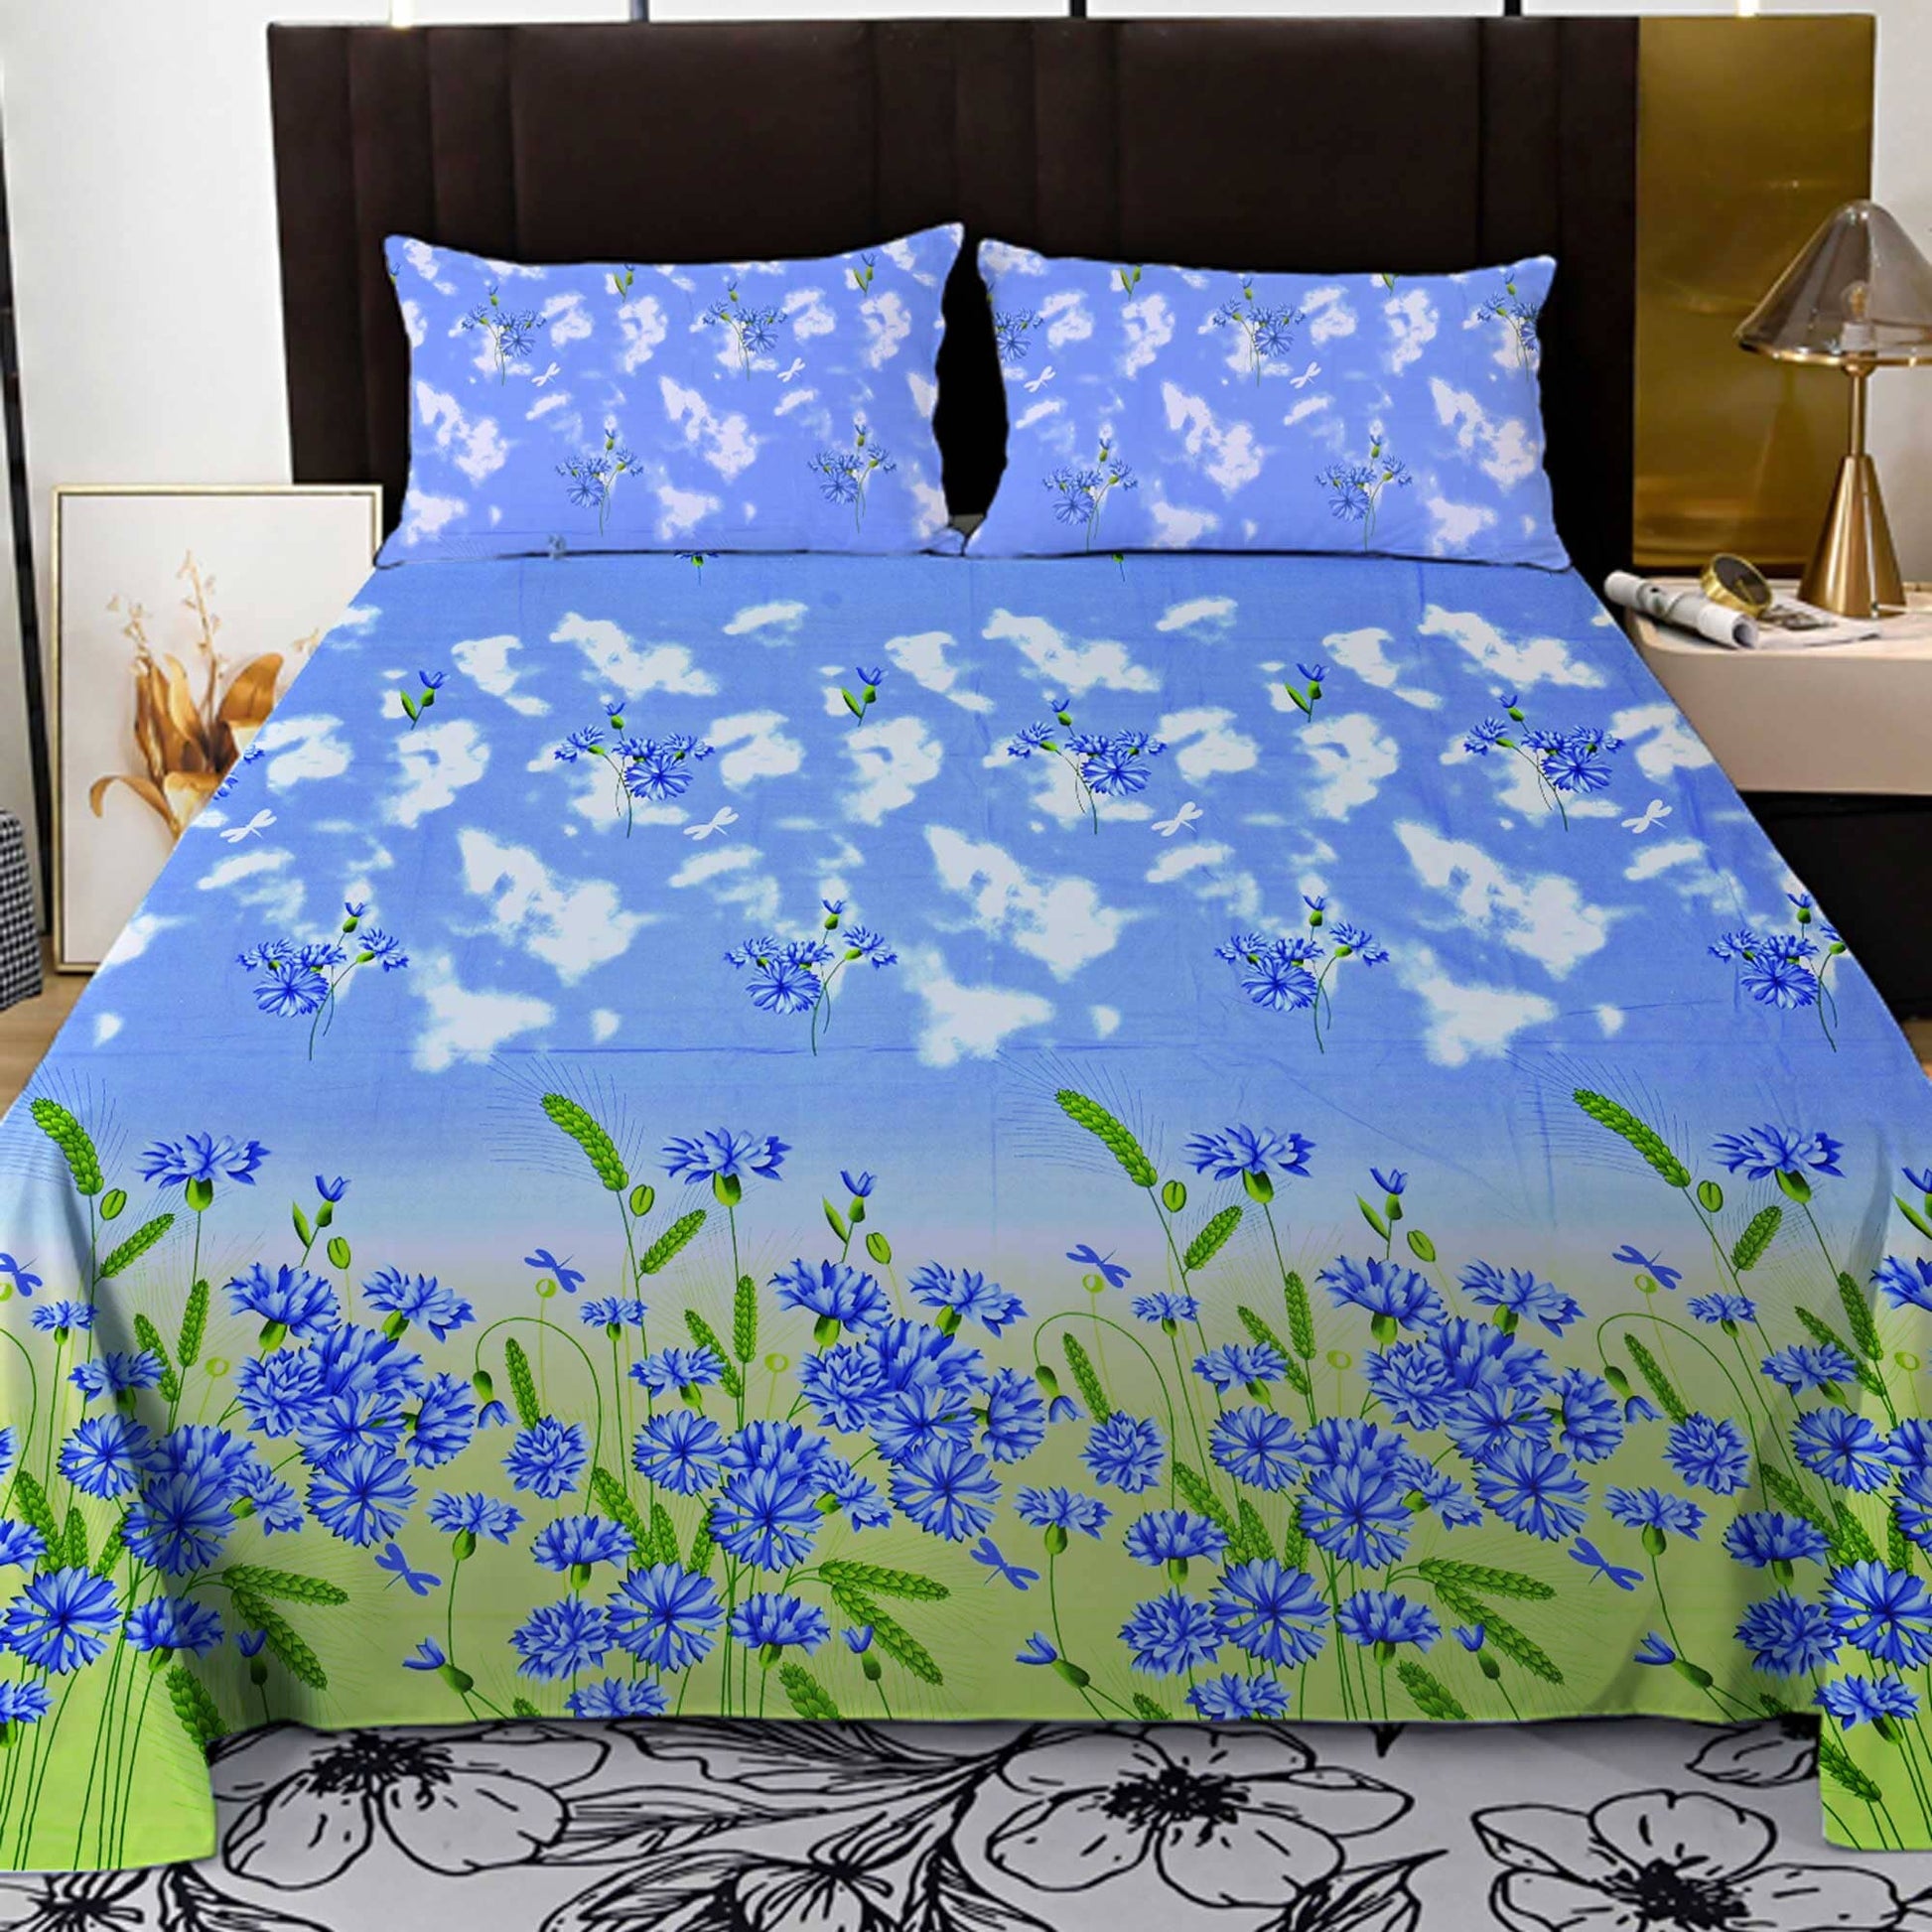 Polo Republica Wheat Floral Printed Premium Collection 3 Piece Double Bed Sheet Bed Sheet Fiza 